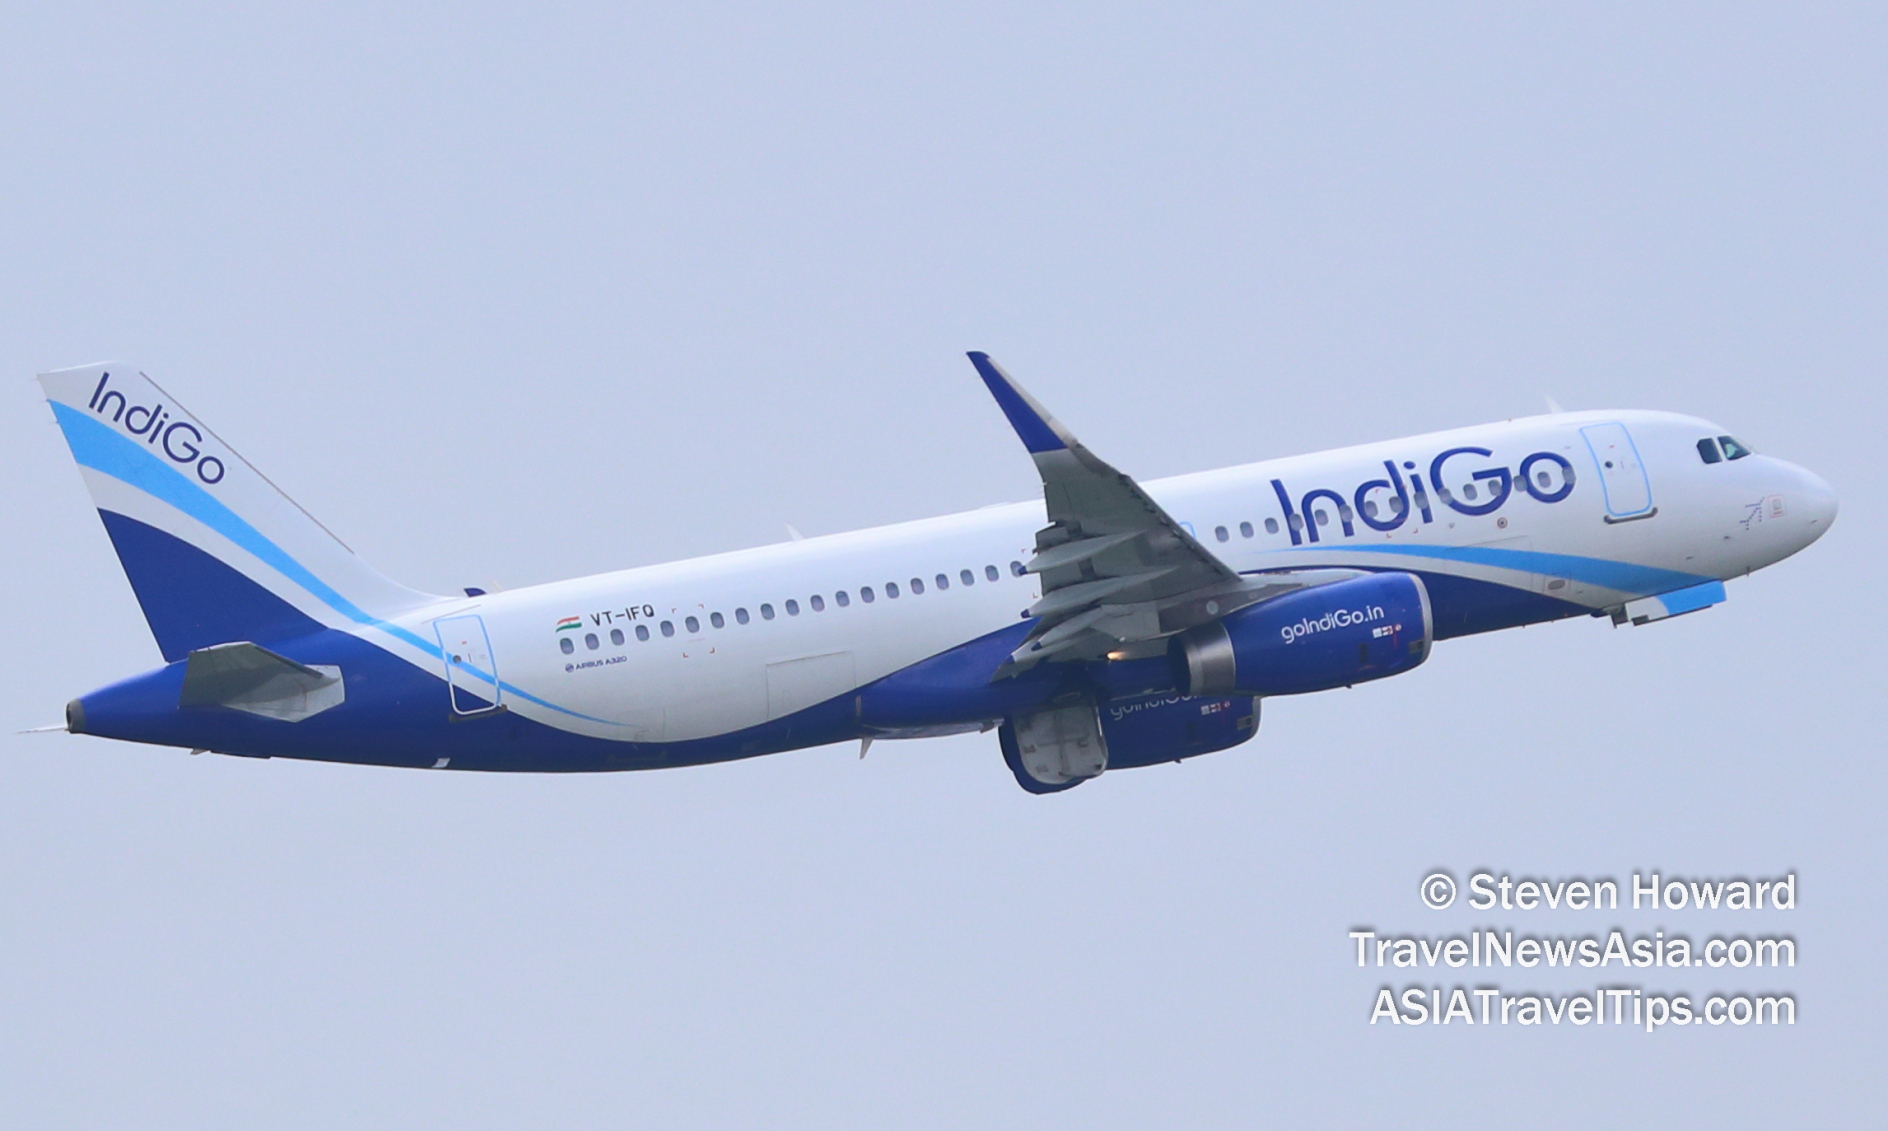 IndiGo A320 reg: VT-IFQ. Picture by Steven Howard of TravelNewsAsia.com Click to enlarge.